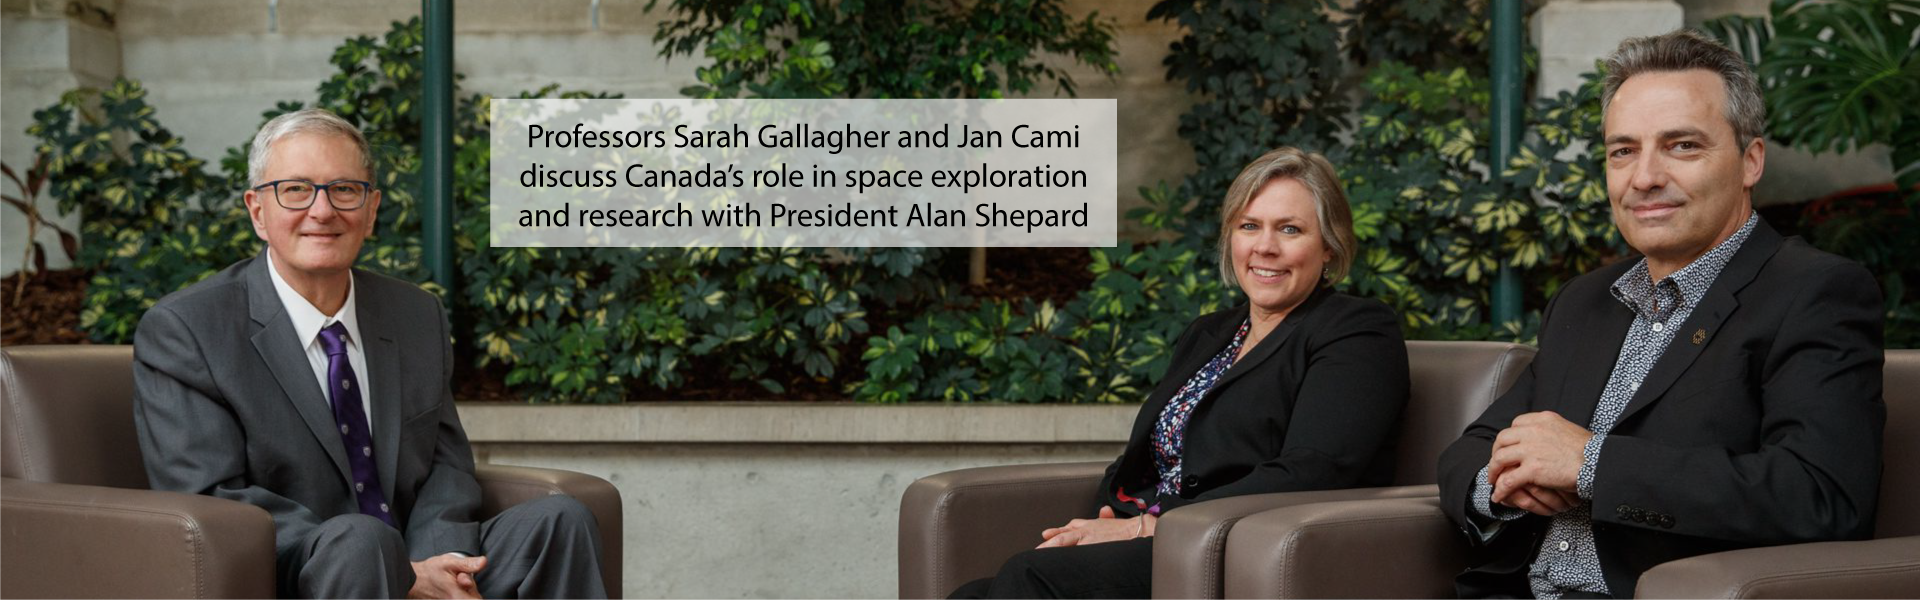 President Alan Shepard in conversation with professors Sarah Gallagher and Jan Cami on Canada’s role in space exploration and research